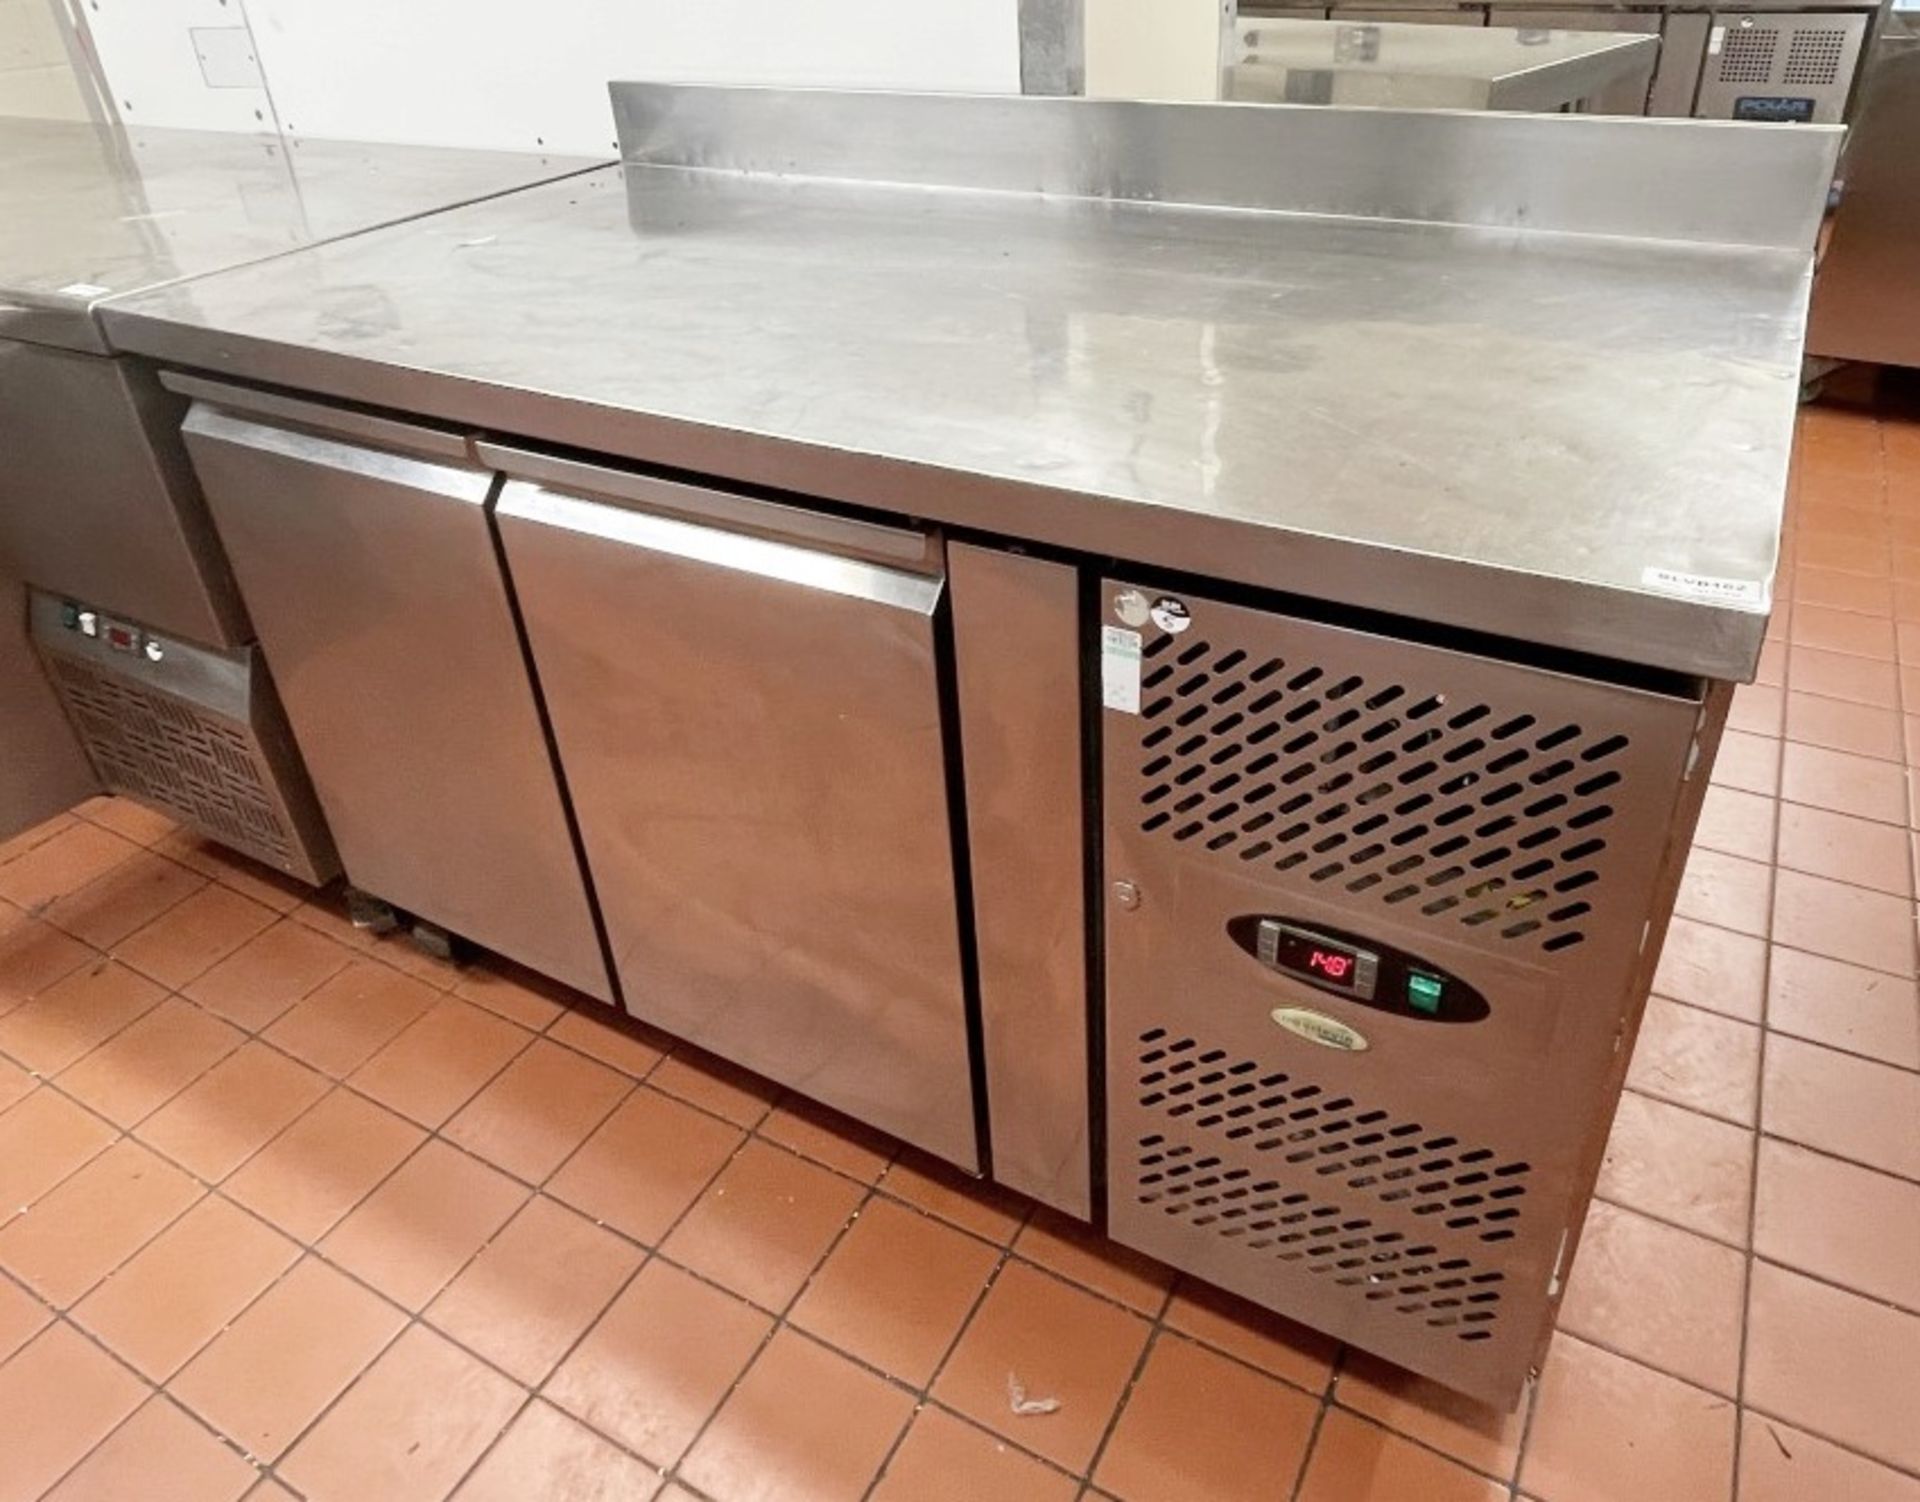 1 x Interlevin Two Door Commercial Refrigerated Prep Counter With Stainless Steel Exterior - Ref: - Image 2 of 5